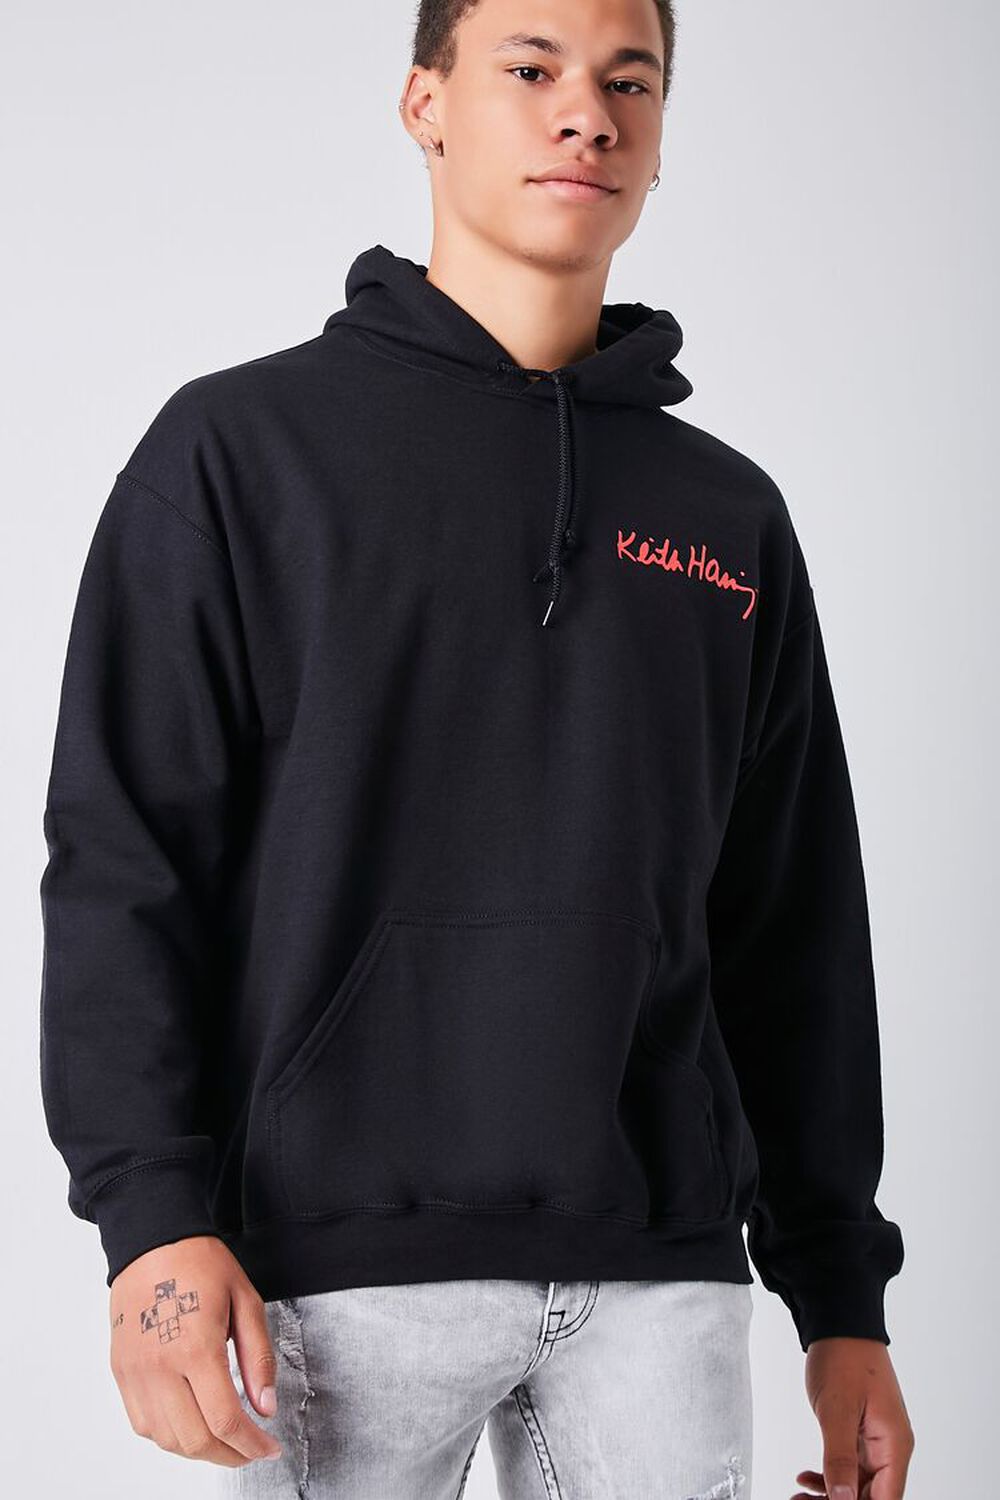 Keith Haring Graphic Hoodie